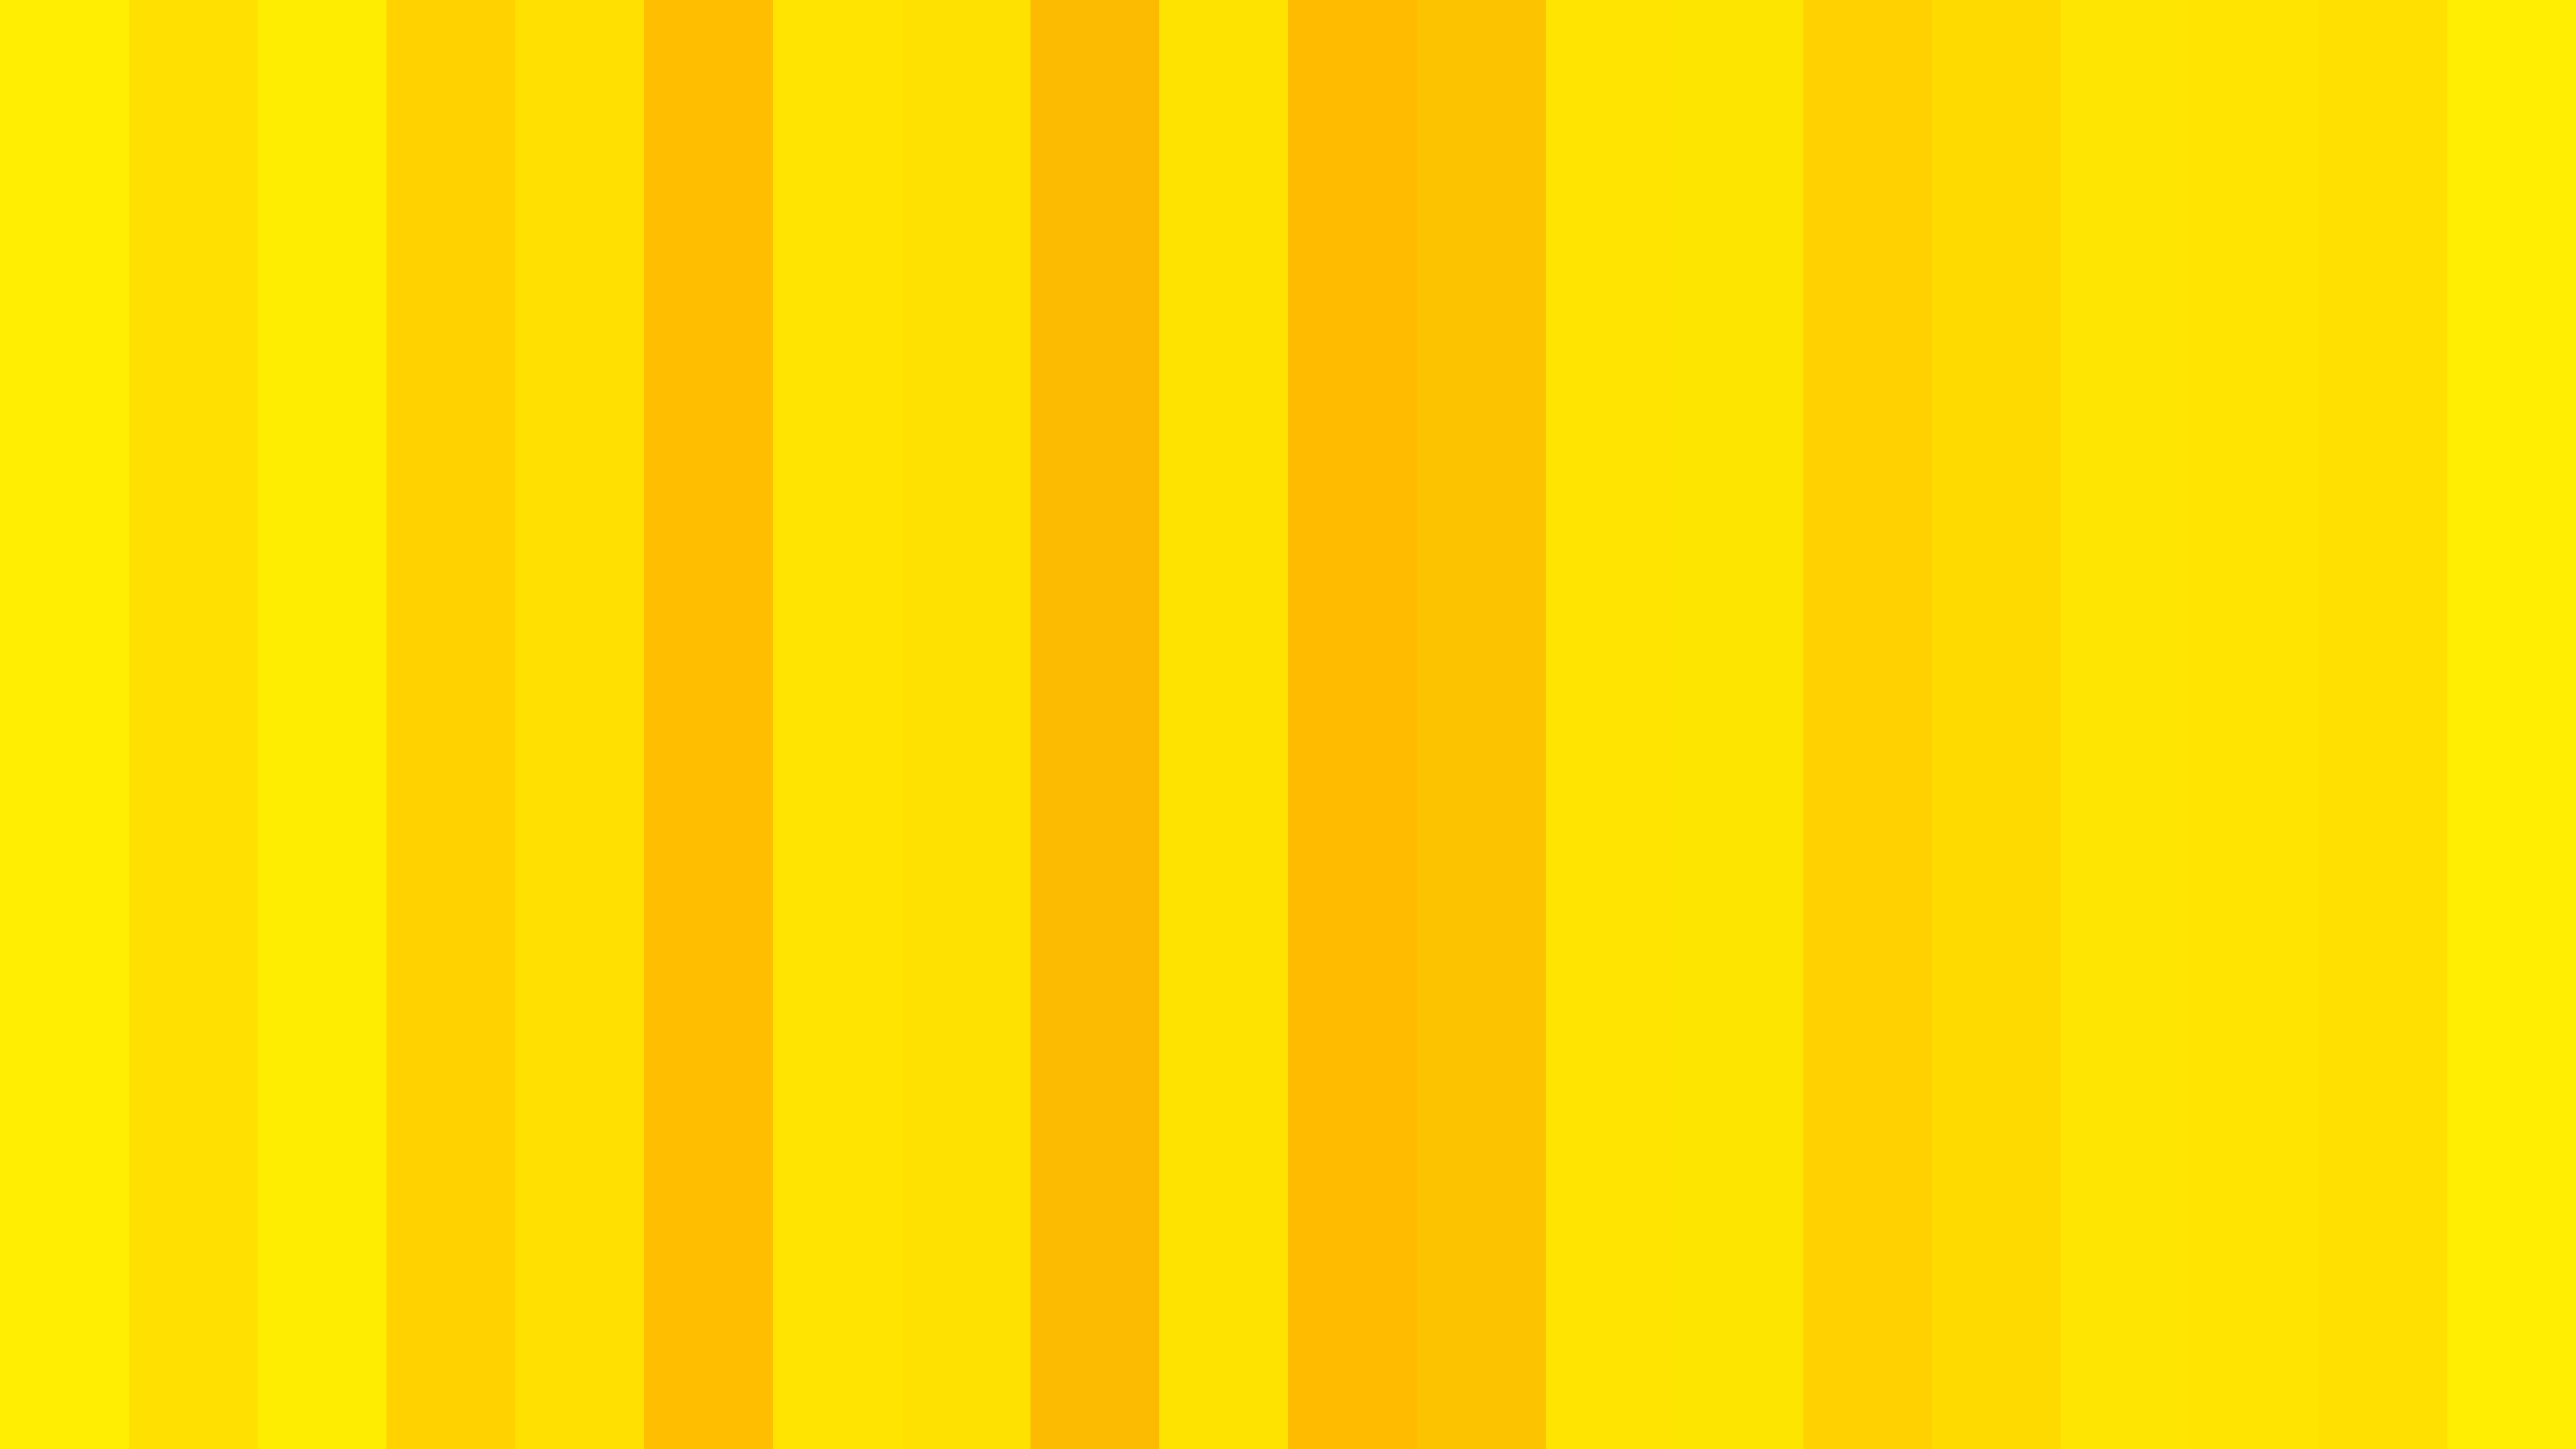 🔥 Download Orange And Yellow Striped Background Image by